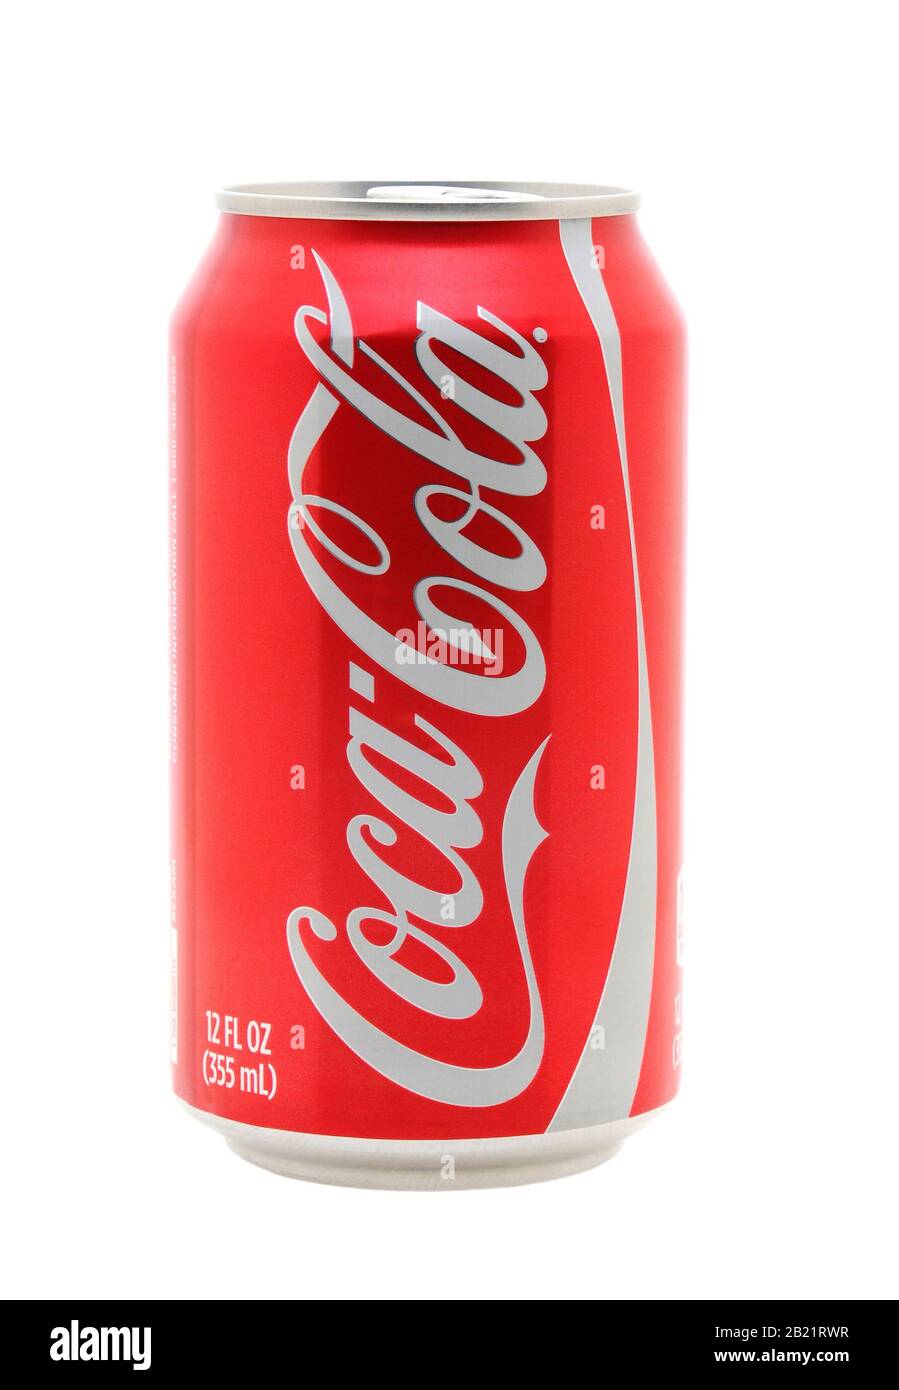 IRVINE, CA - January 11, 2013: Photo of a 12 ounce can of Coca-Cola Classic. Coca-Cola is the one of the worlds favorite carbonated beverages. Stock Photo